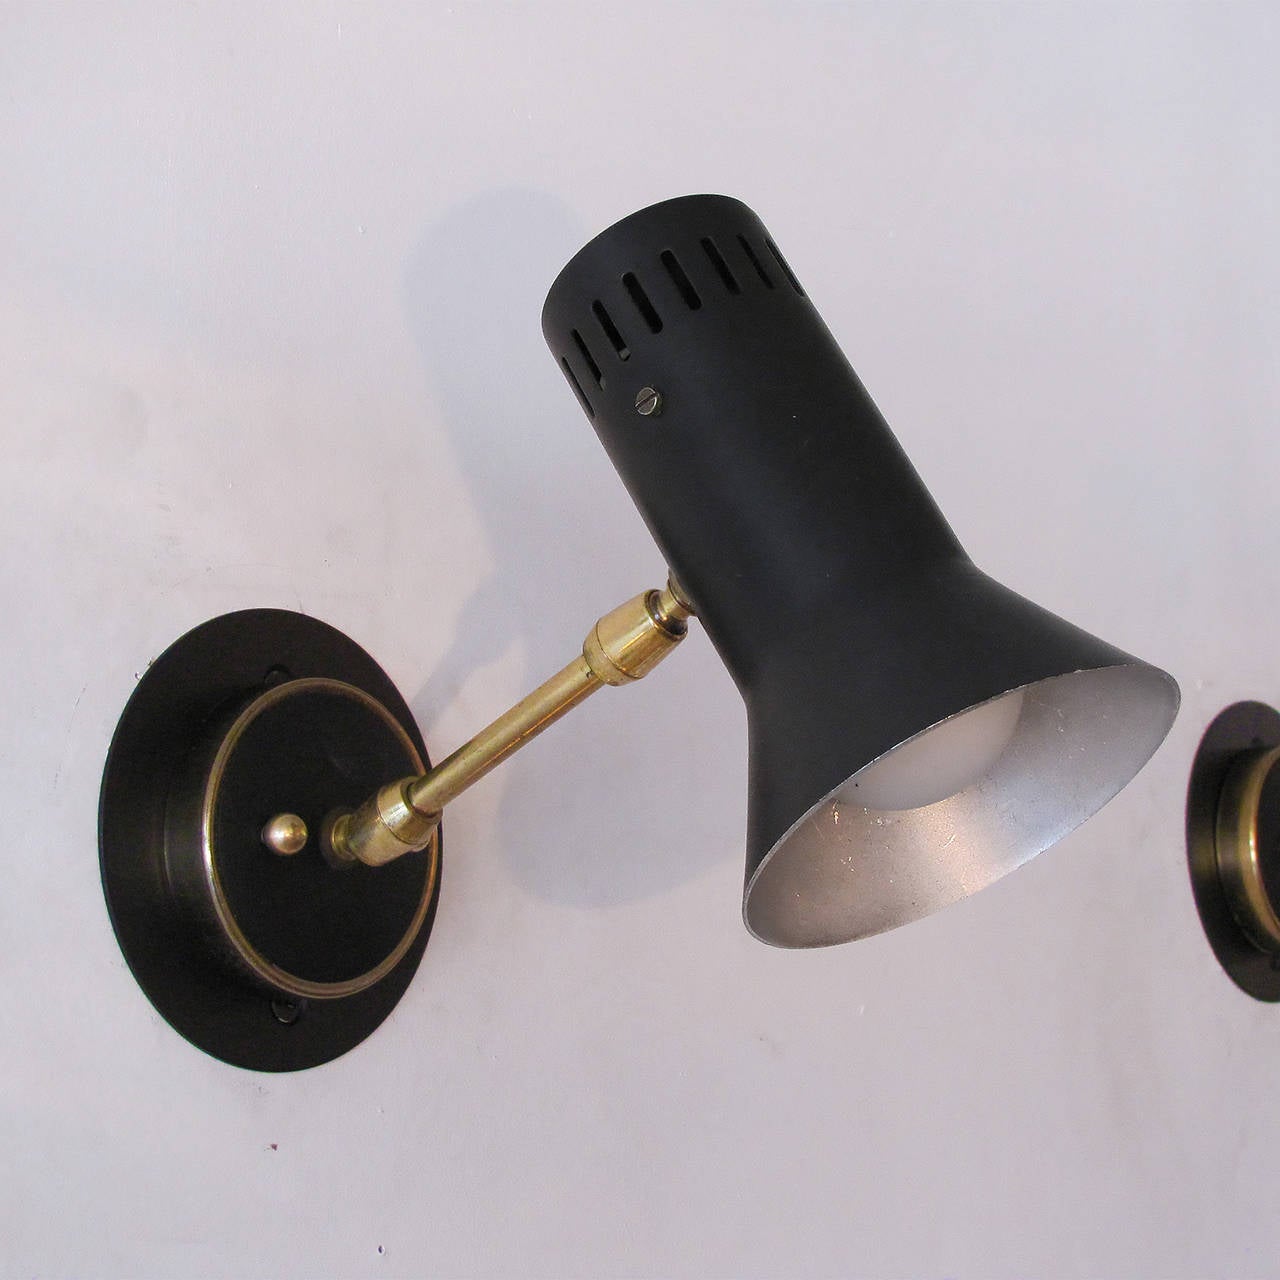 elegant, articulate pair of Italian wall lights, double joint brass arms, slotted partially conical shades, priced as a pair